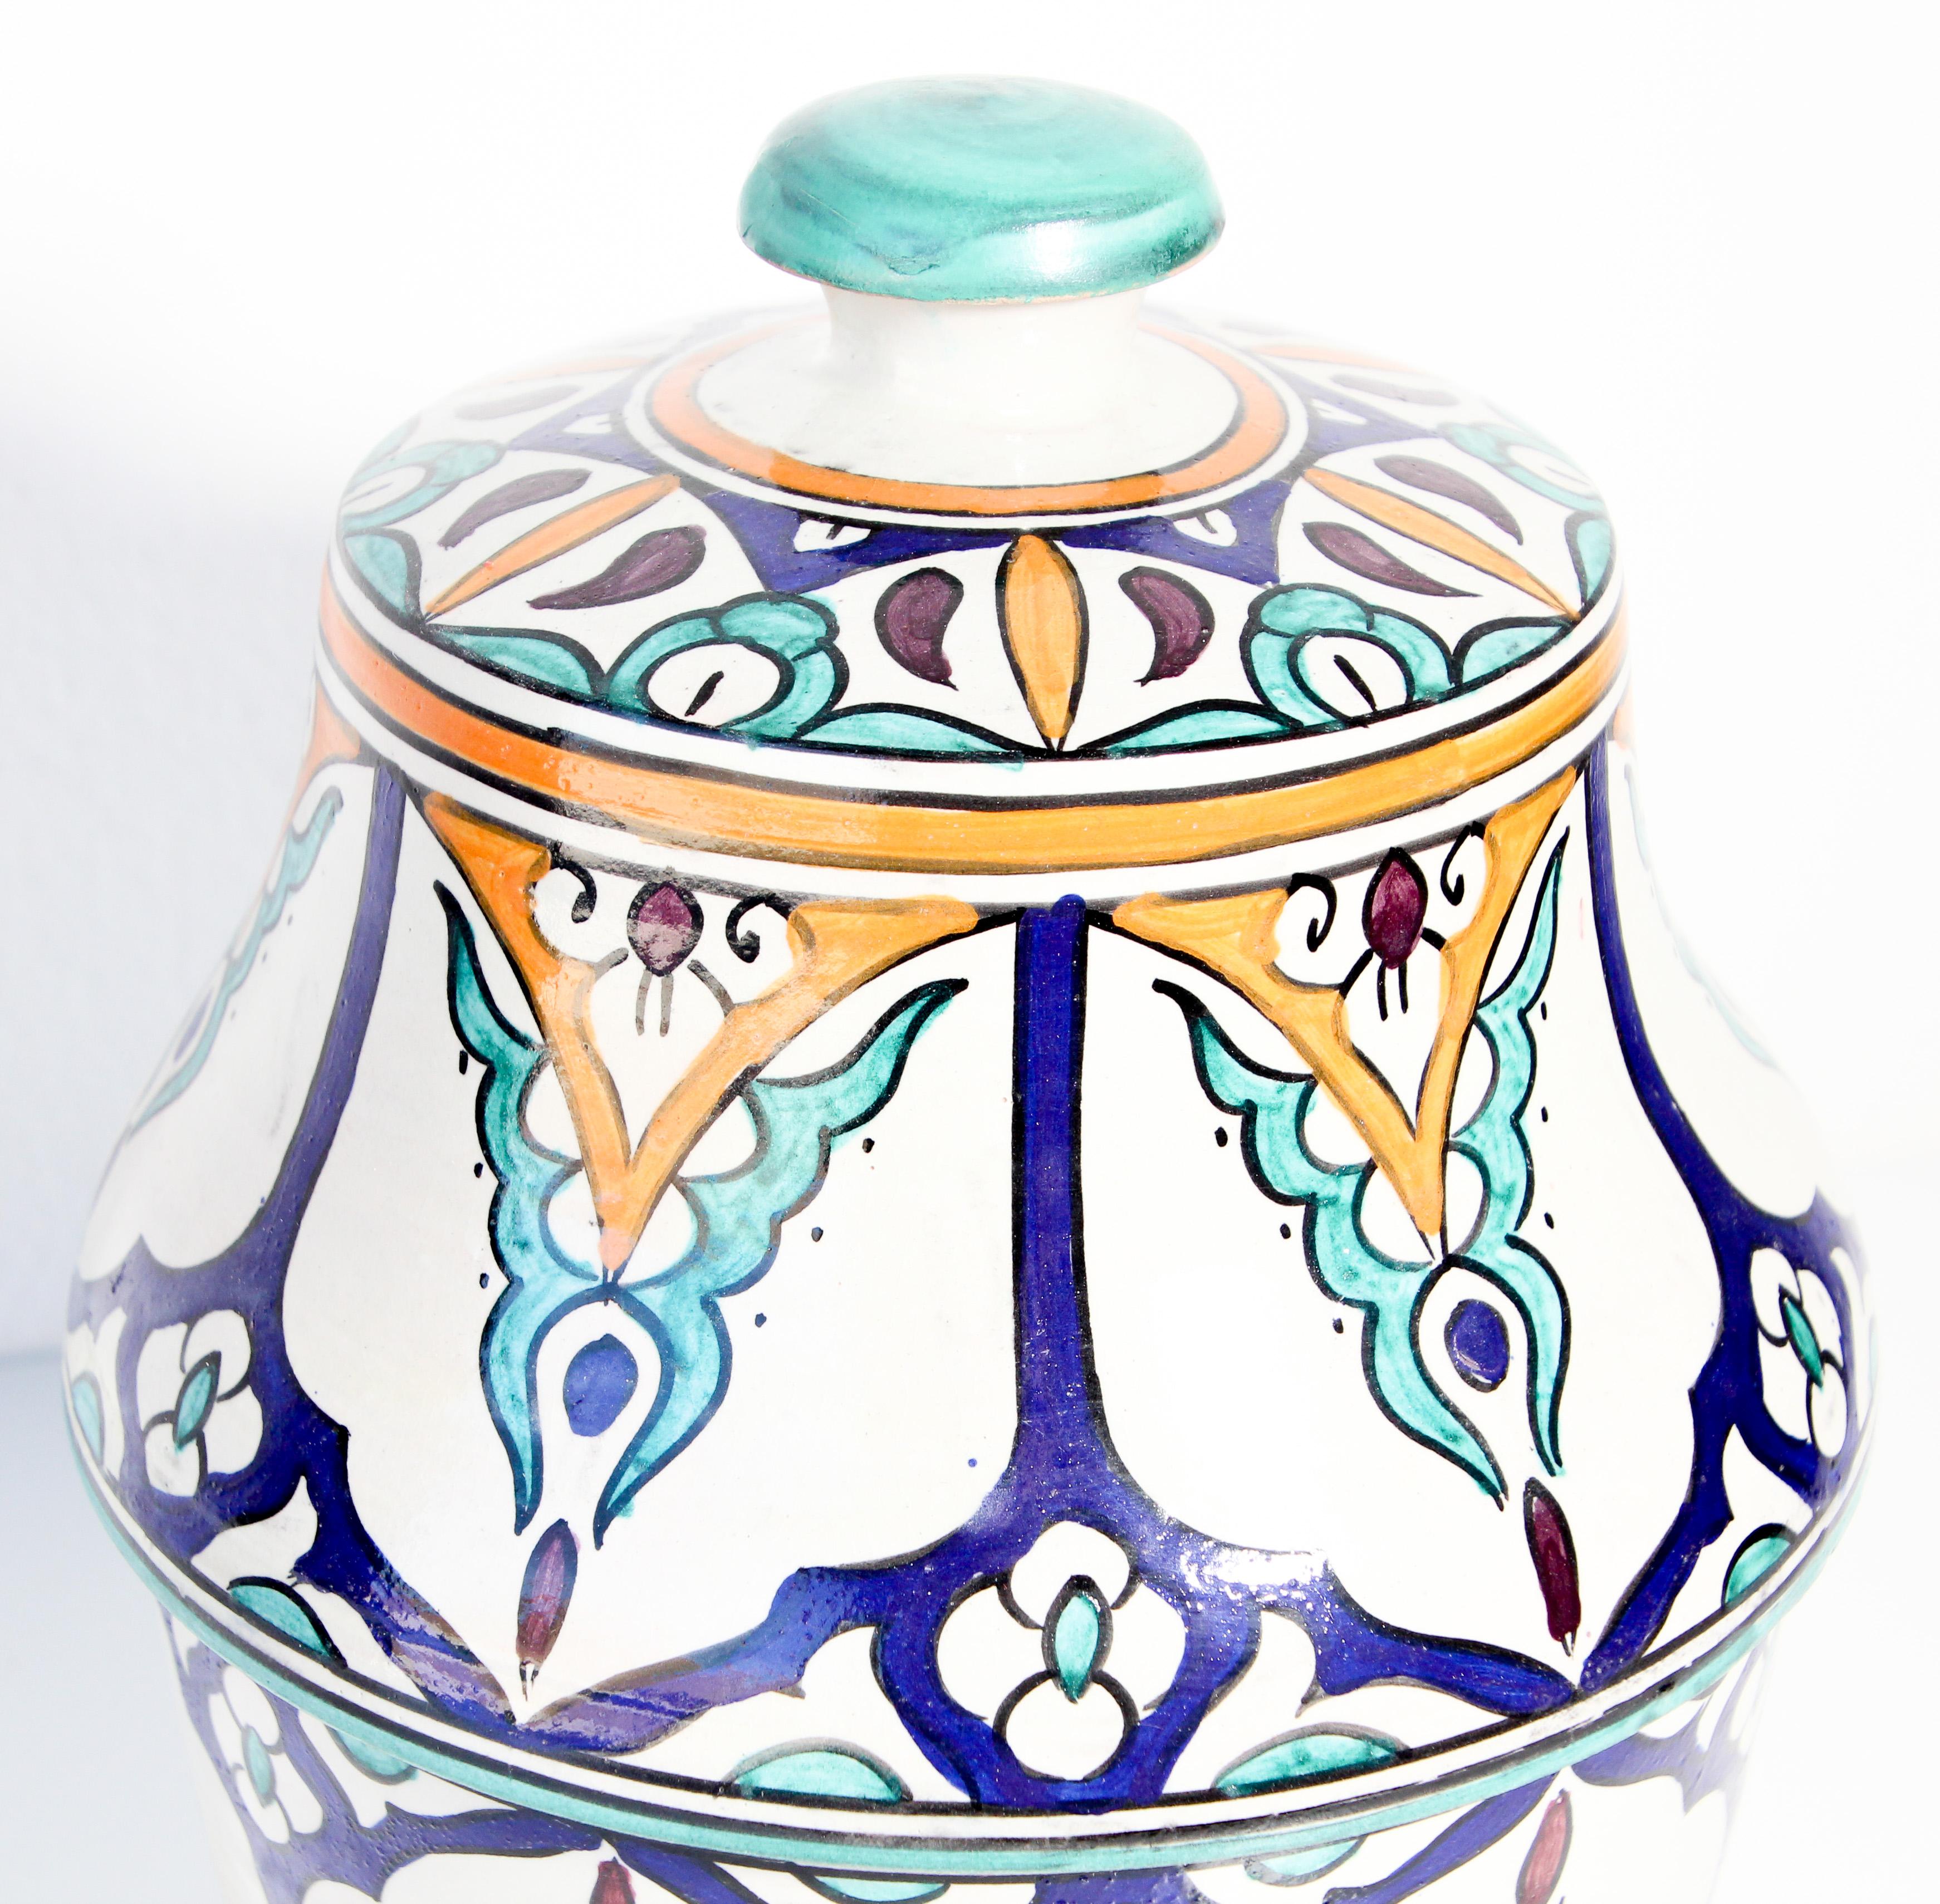 Moorish Ceramic Glazed Covered Jars Handcrafted in Fez Morocco For Sale 3